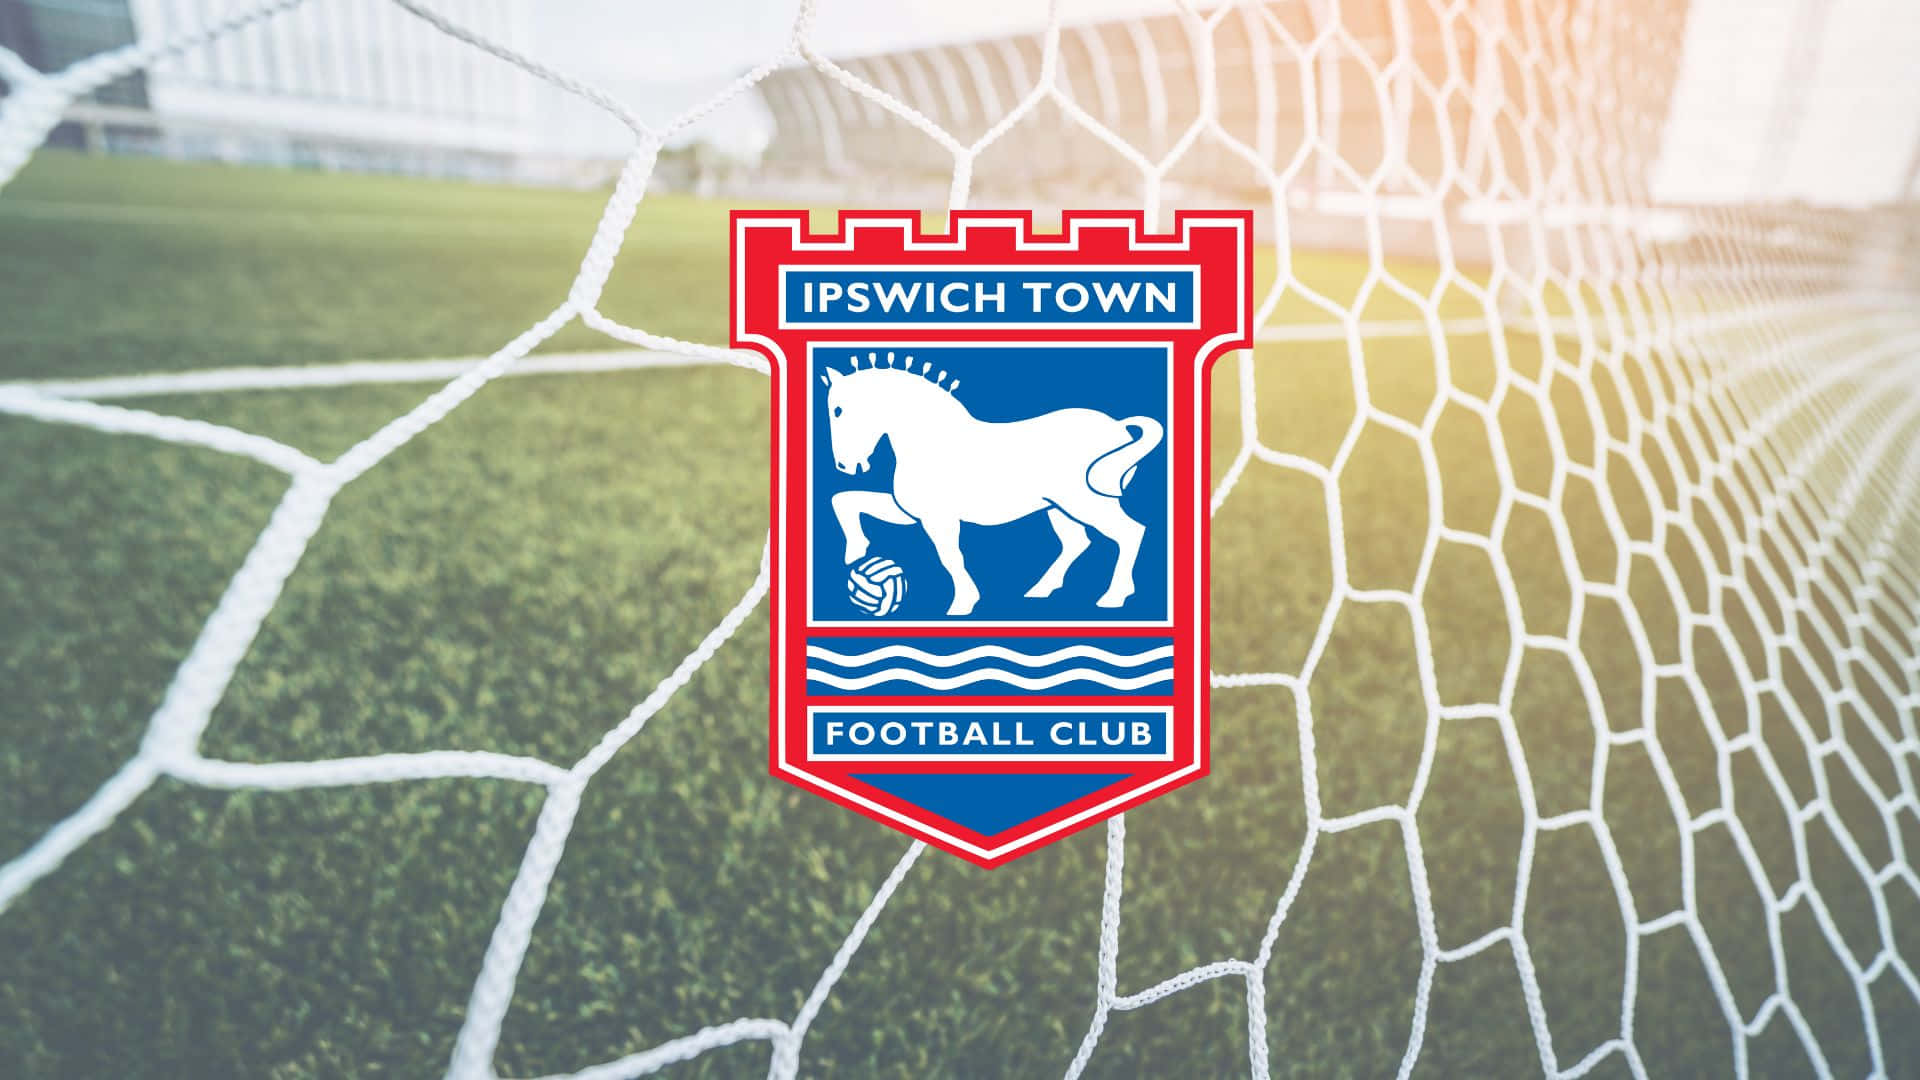 Ipswich Town Football Club in Action Wallpaper